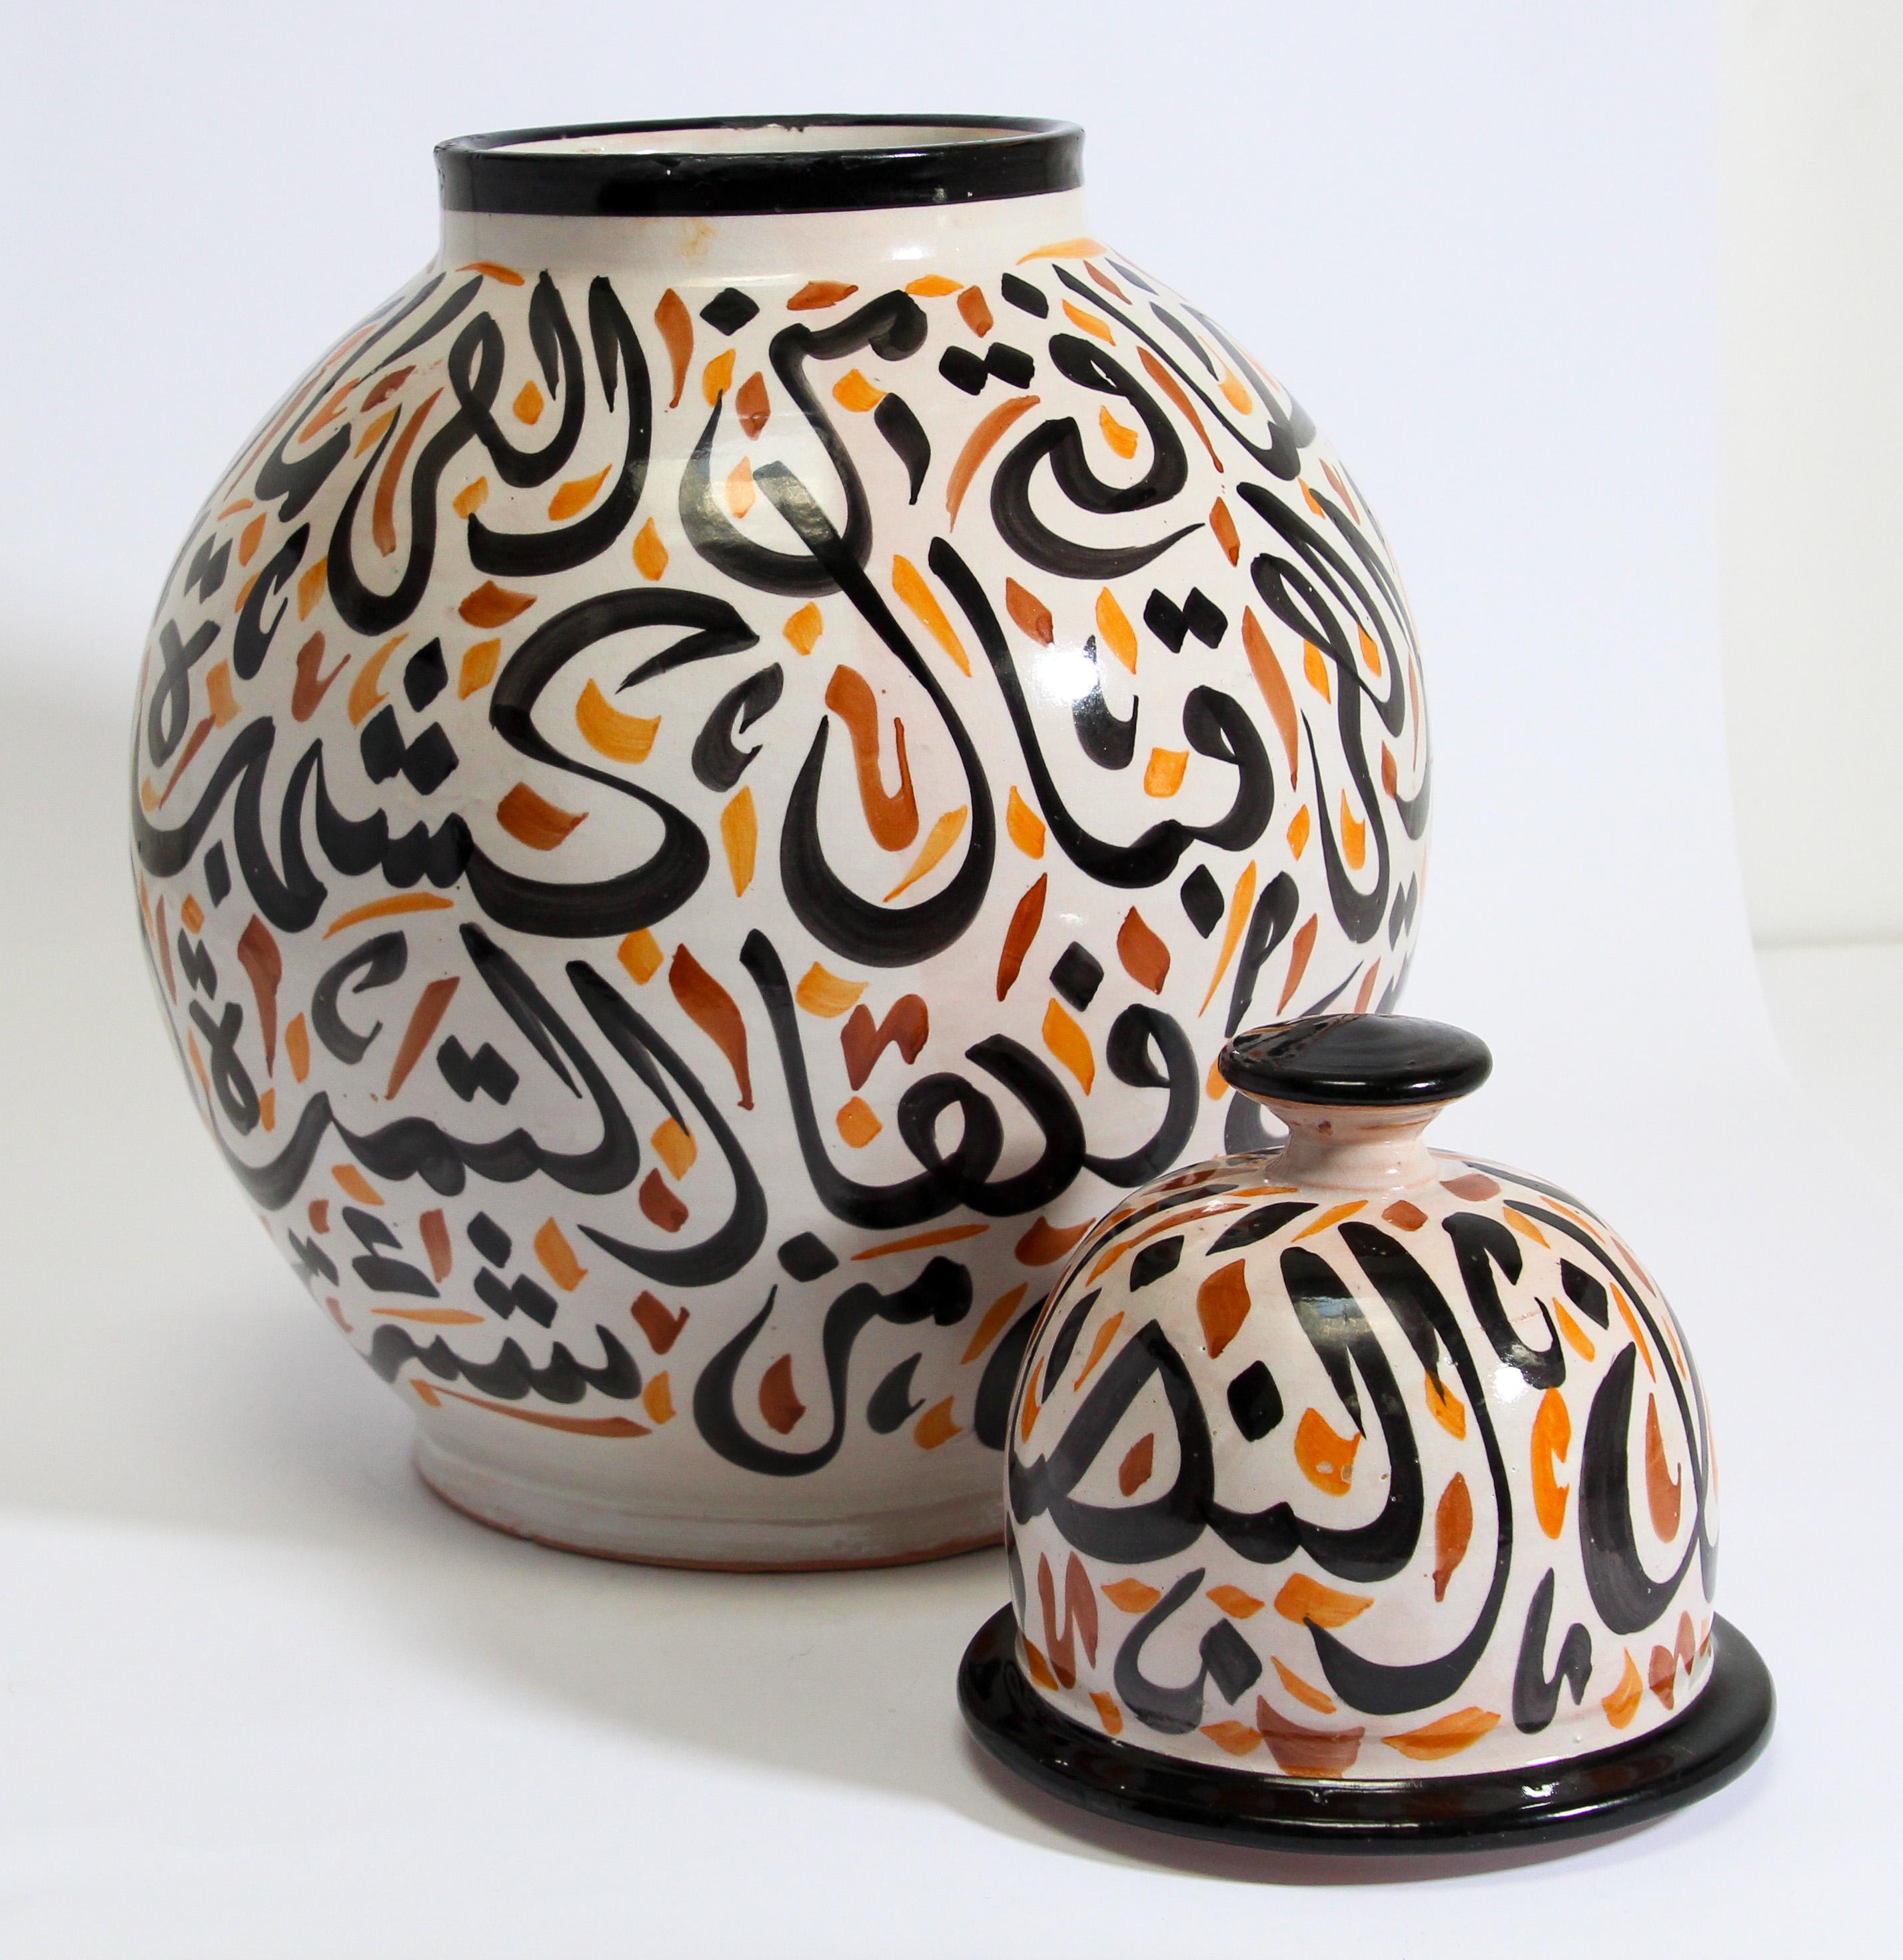 Moroccan Ceramic Lidded Urn with Arabic Calligraphy Lettrism Writing For Sale 1